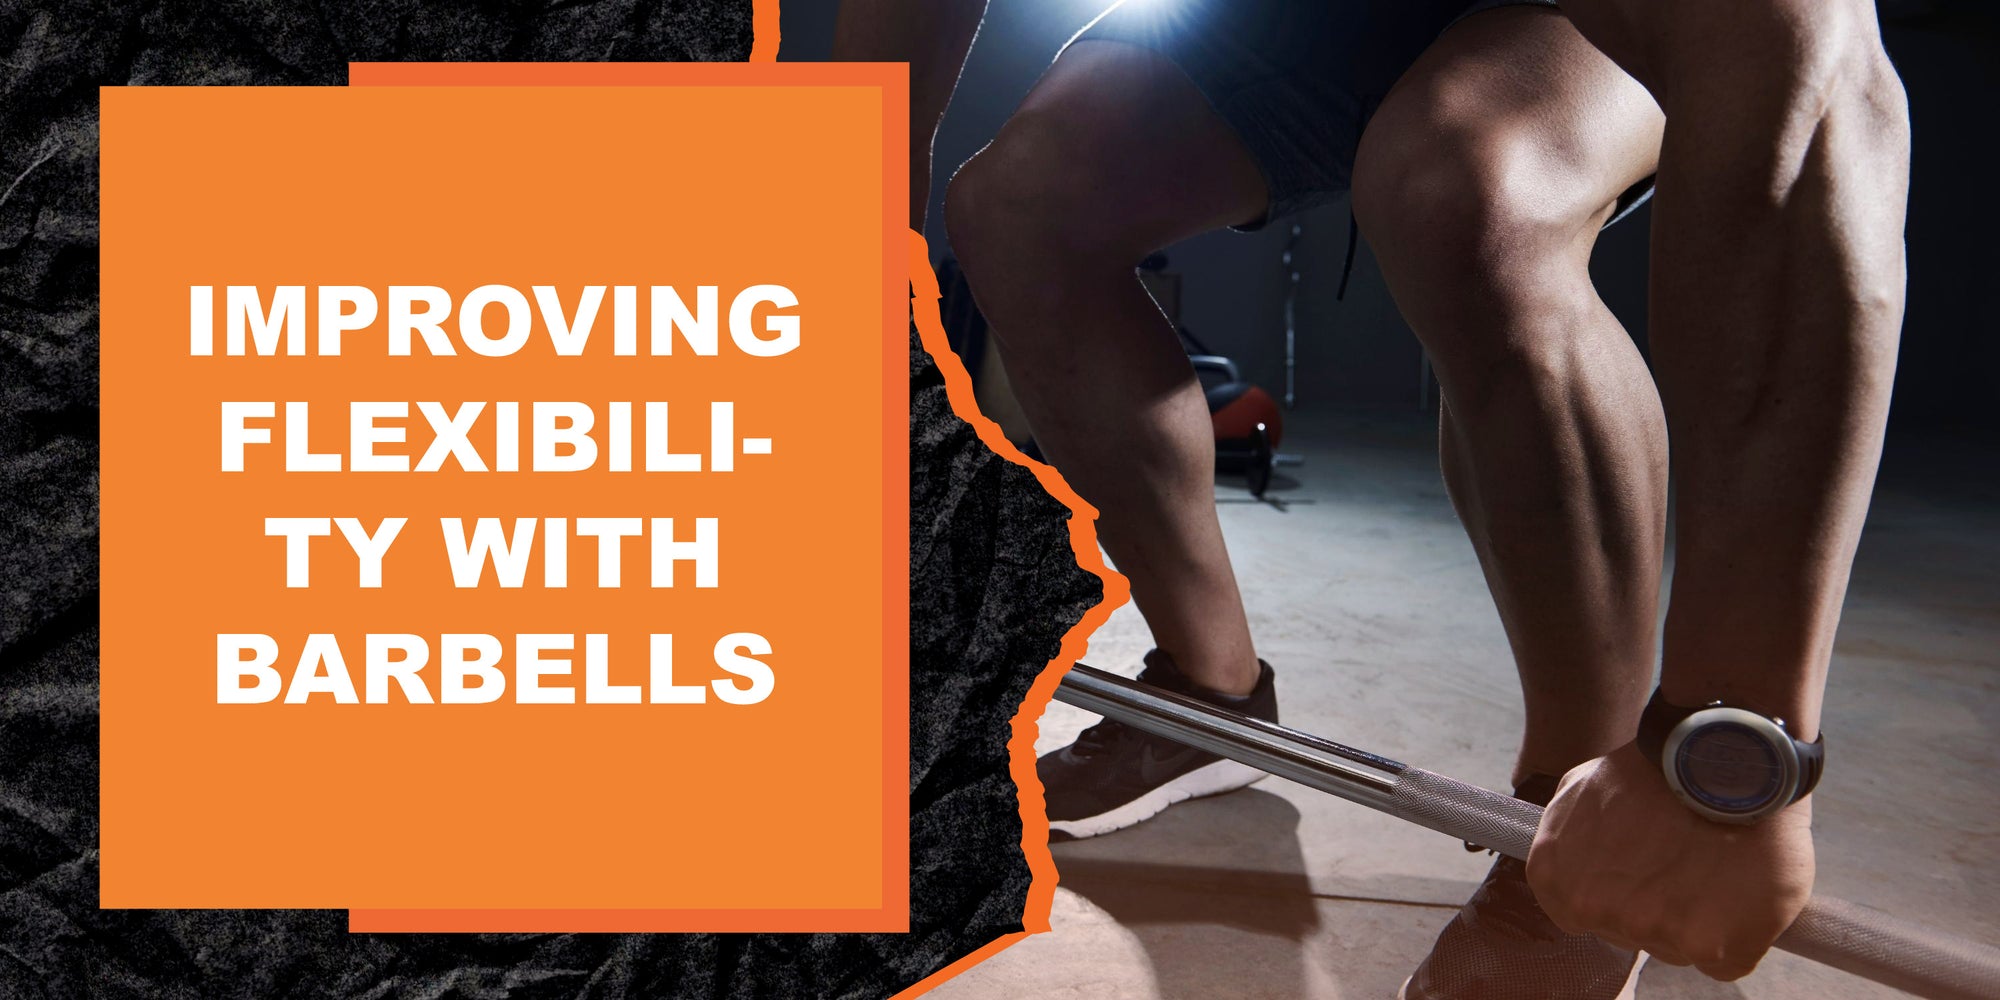 Improving Flexibility With Barbells